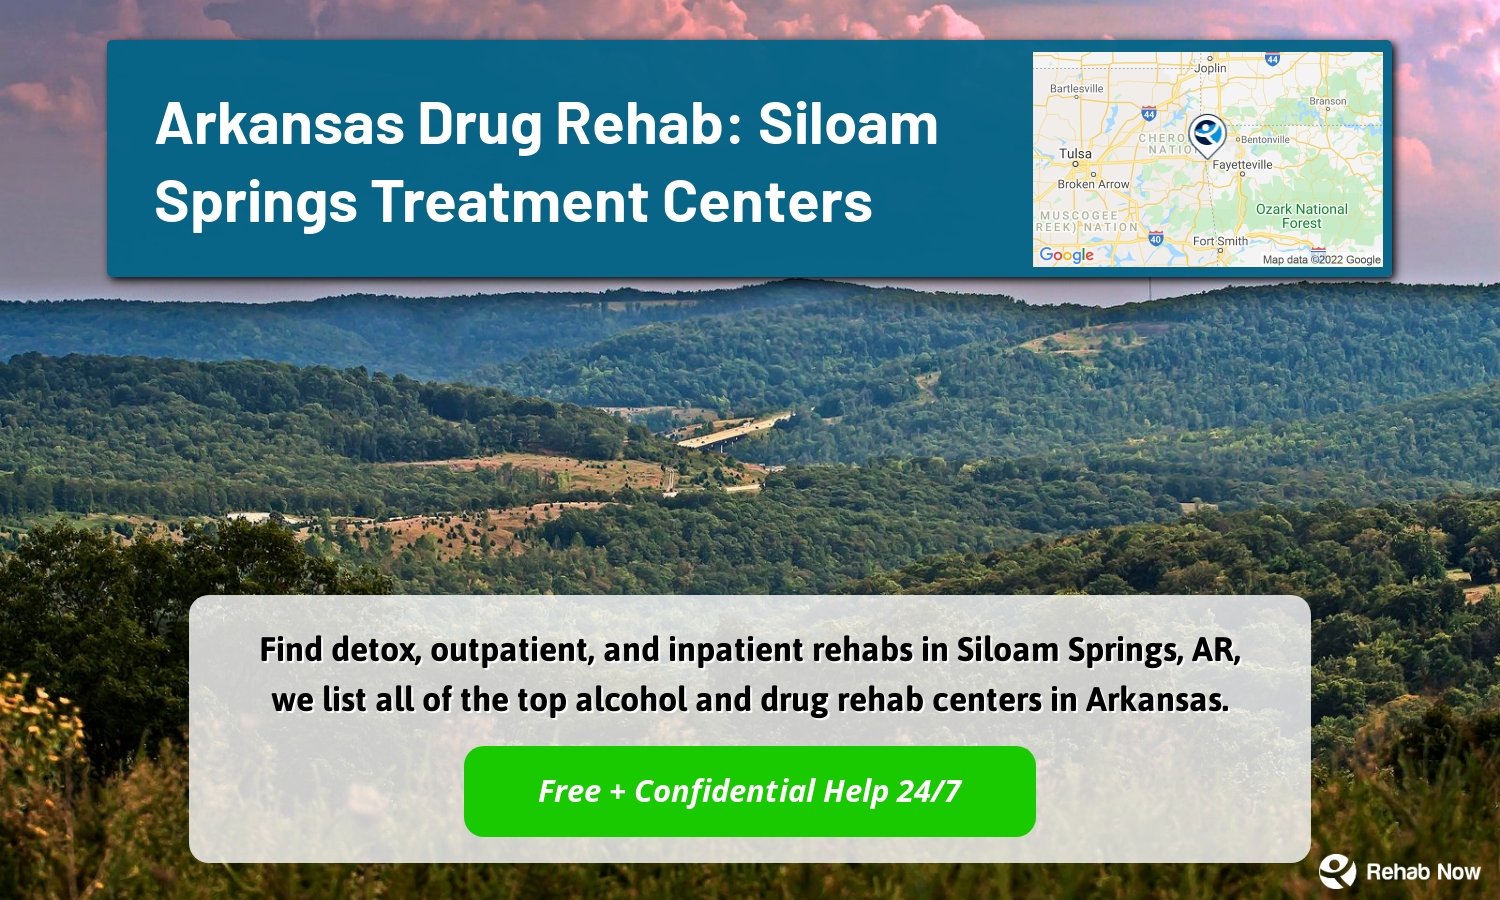 Find detox, outpatient, and inpatient rehabs in Siloam Springs, AR, we list all of the top alcohol and drug rehab centers in Arkansas.